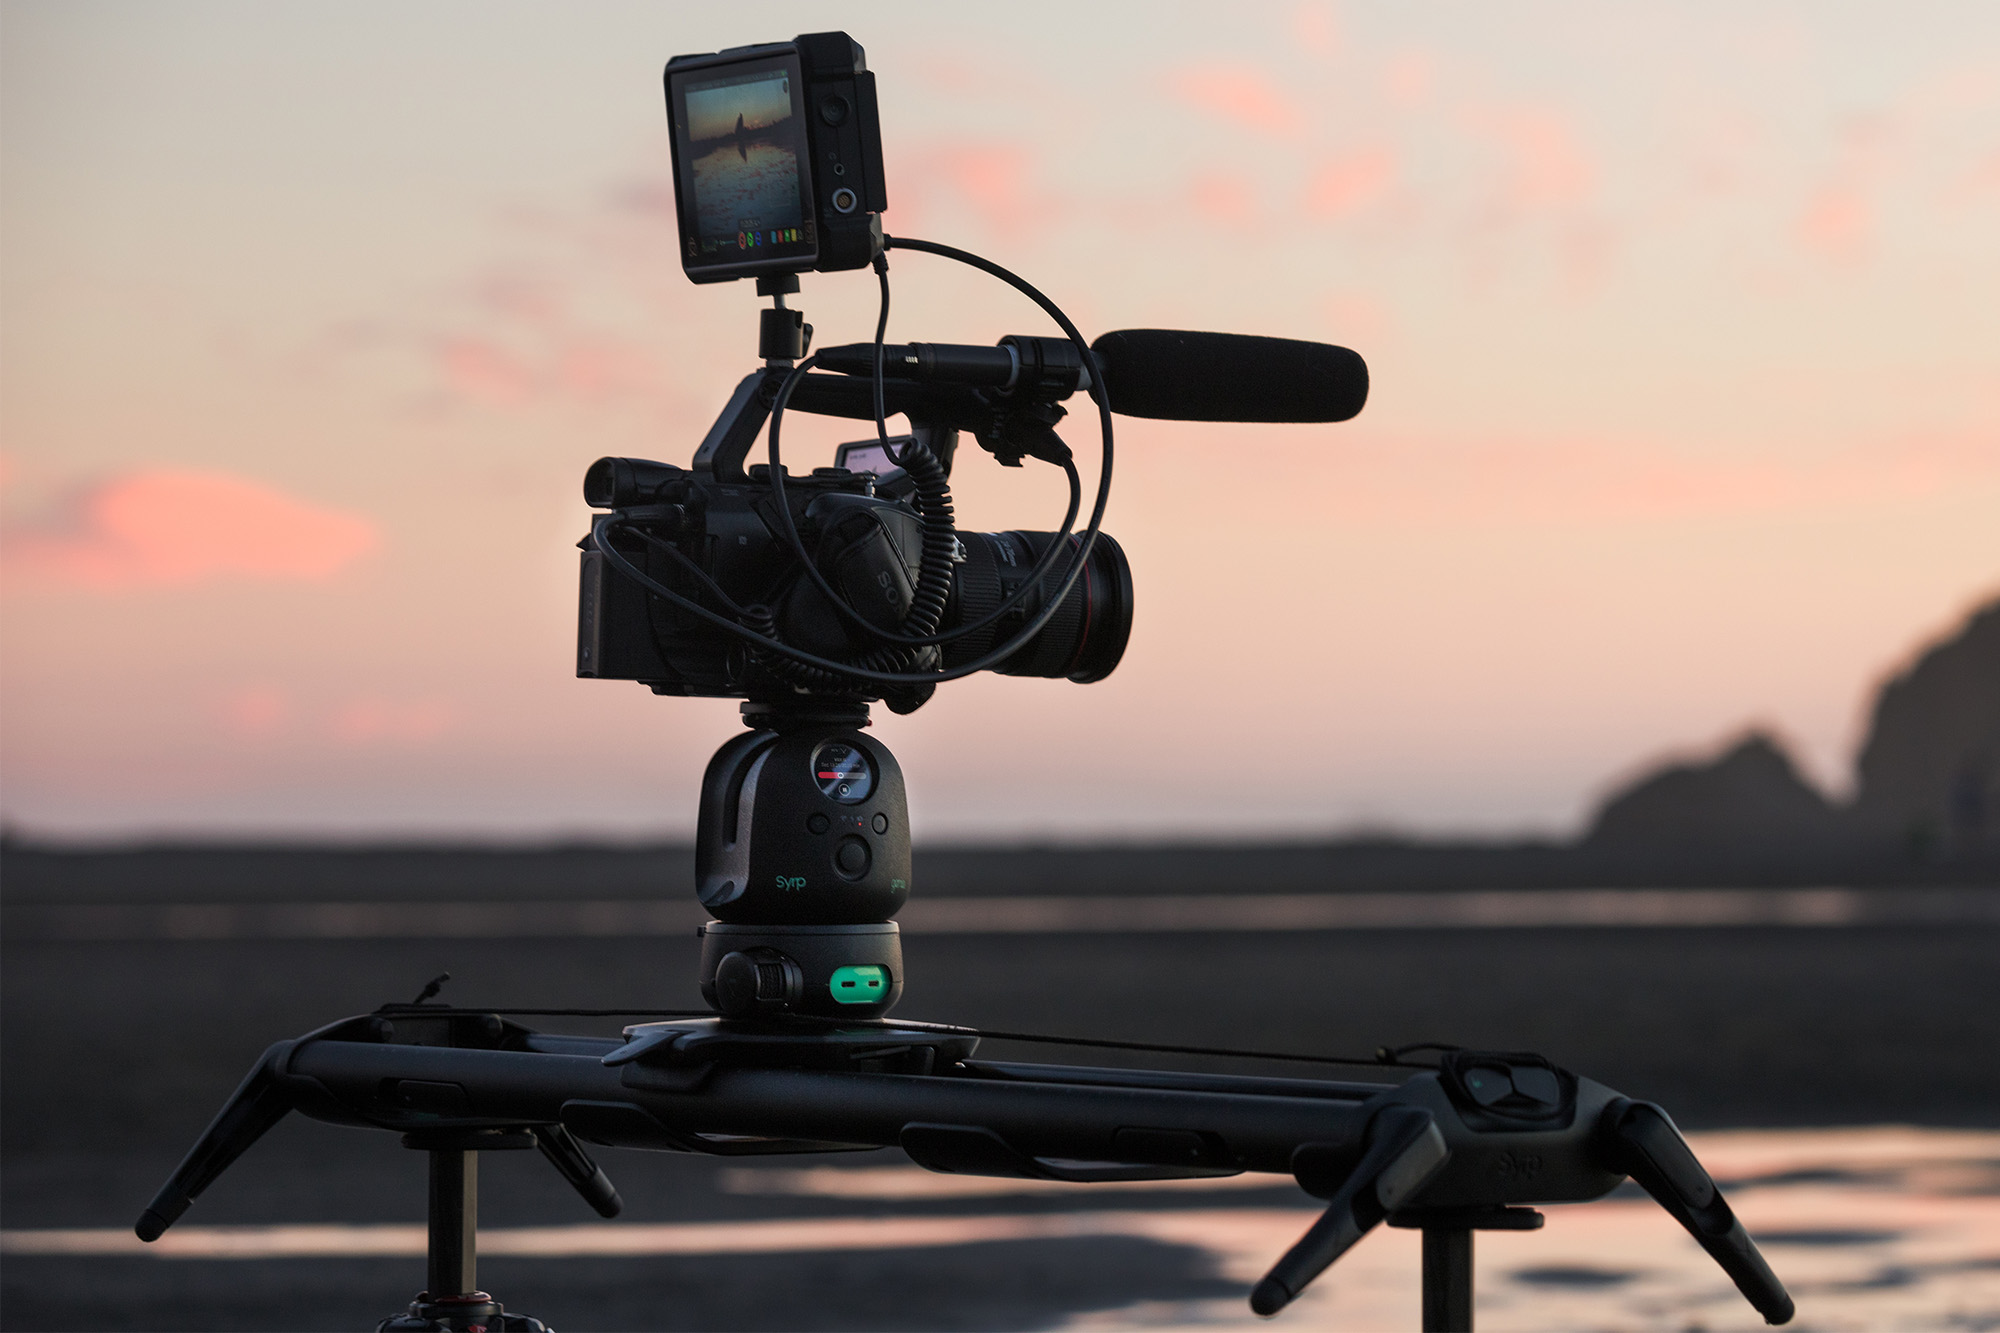 Syrp Announces The Magic Carpet Pro – A Flexible Professional Slider That Can Grow